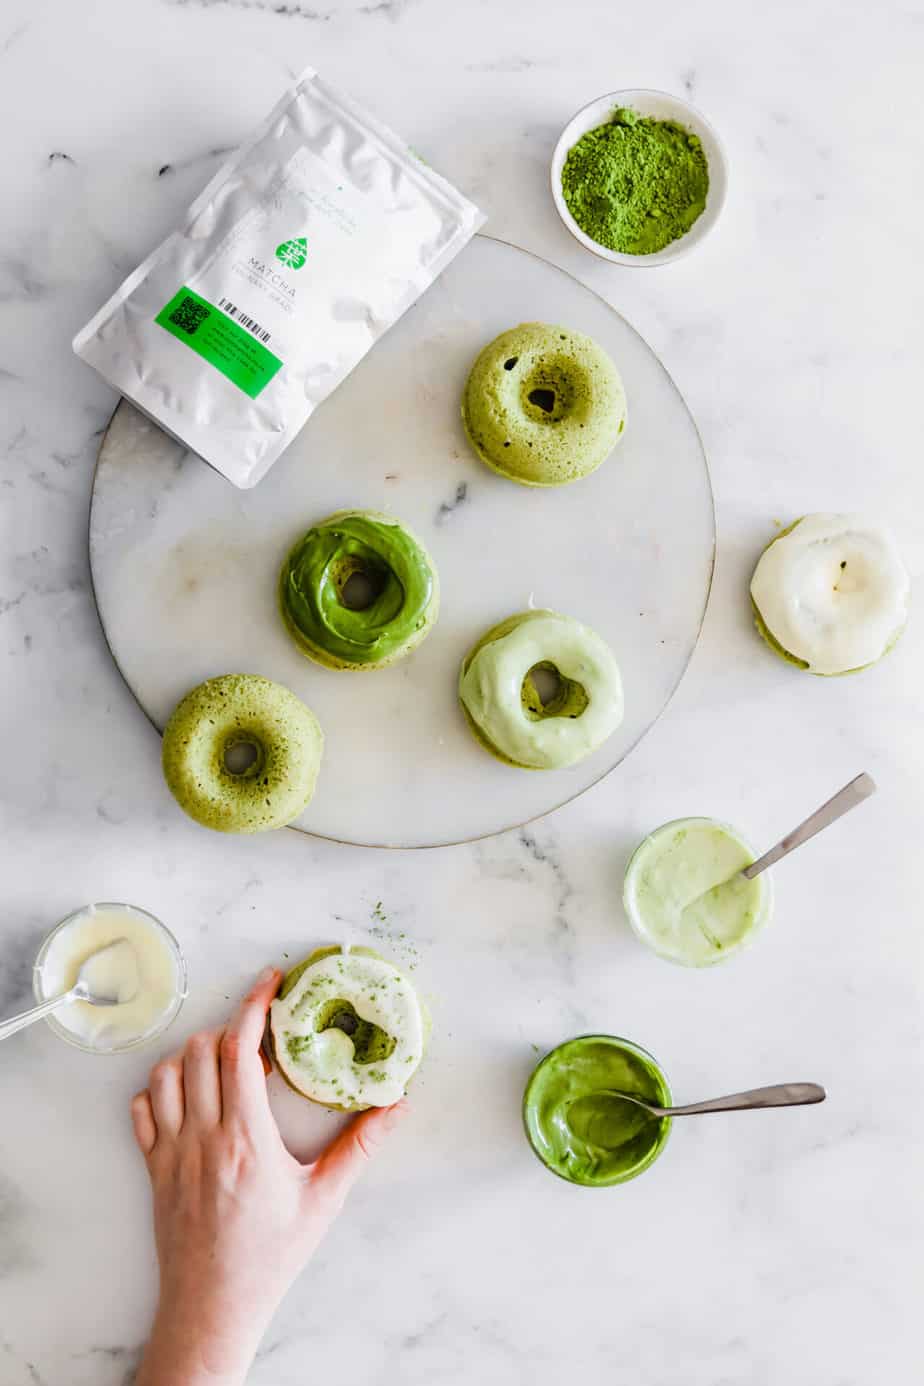 Baked matcha donuts with cream cheese glaze in varying shades of grey.